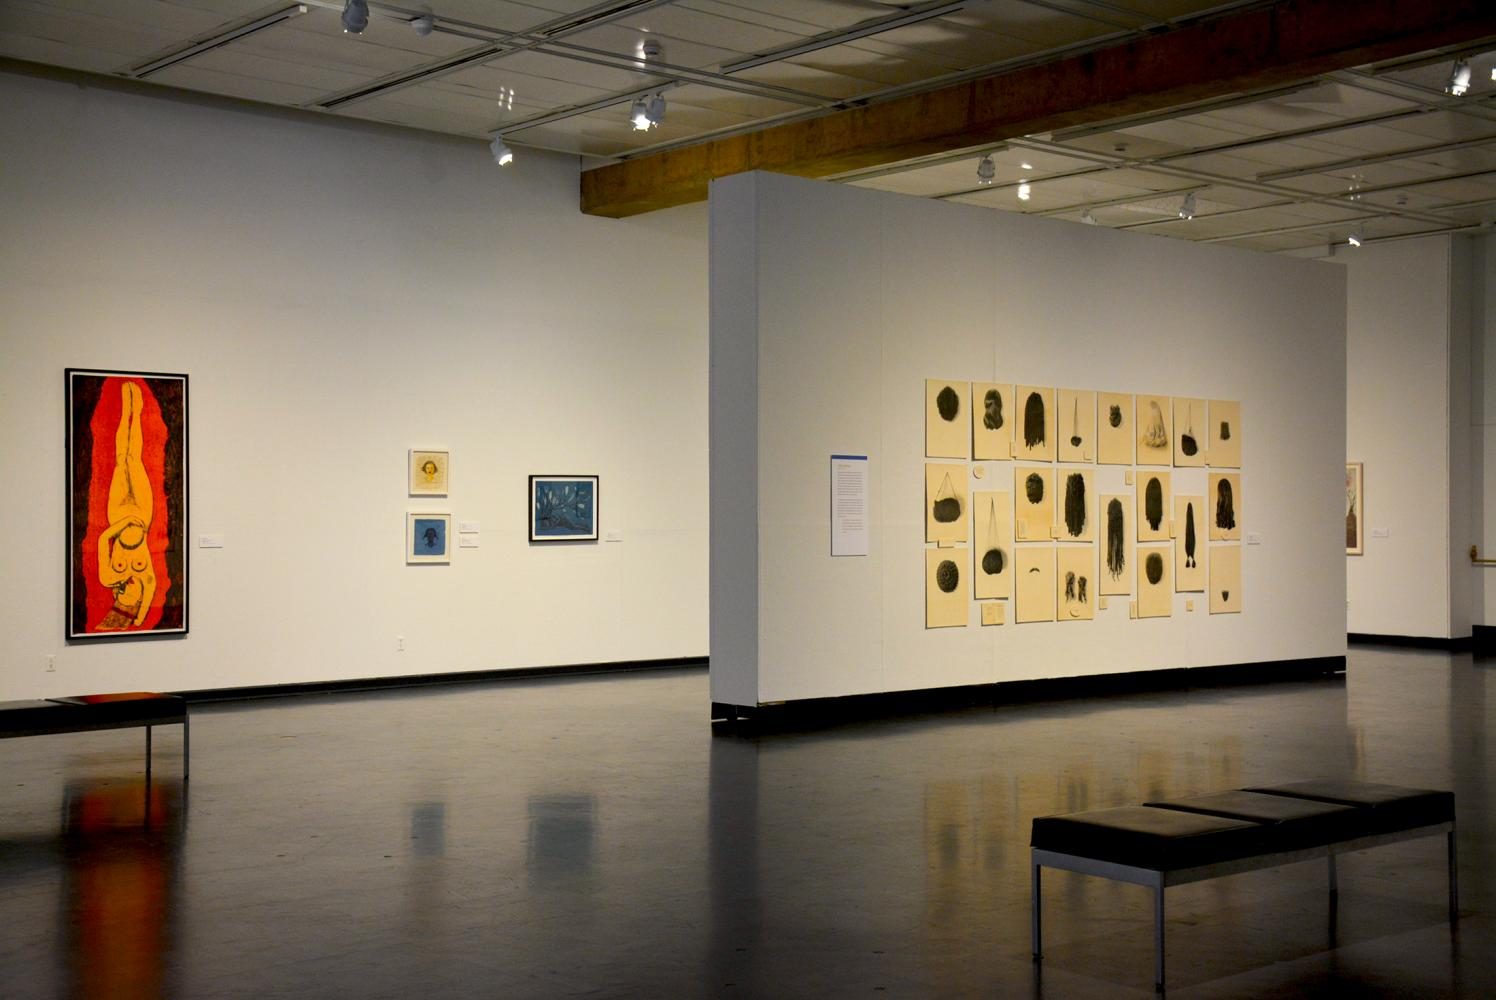 The WSU Museum of Art has opened an exhibit focused on female artists and the ways they contribute to artistic discussion. The exhibit features artwork from Africa, Asia, and North America.